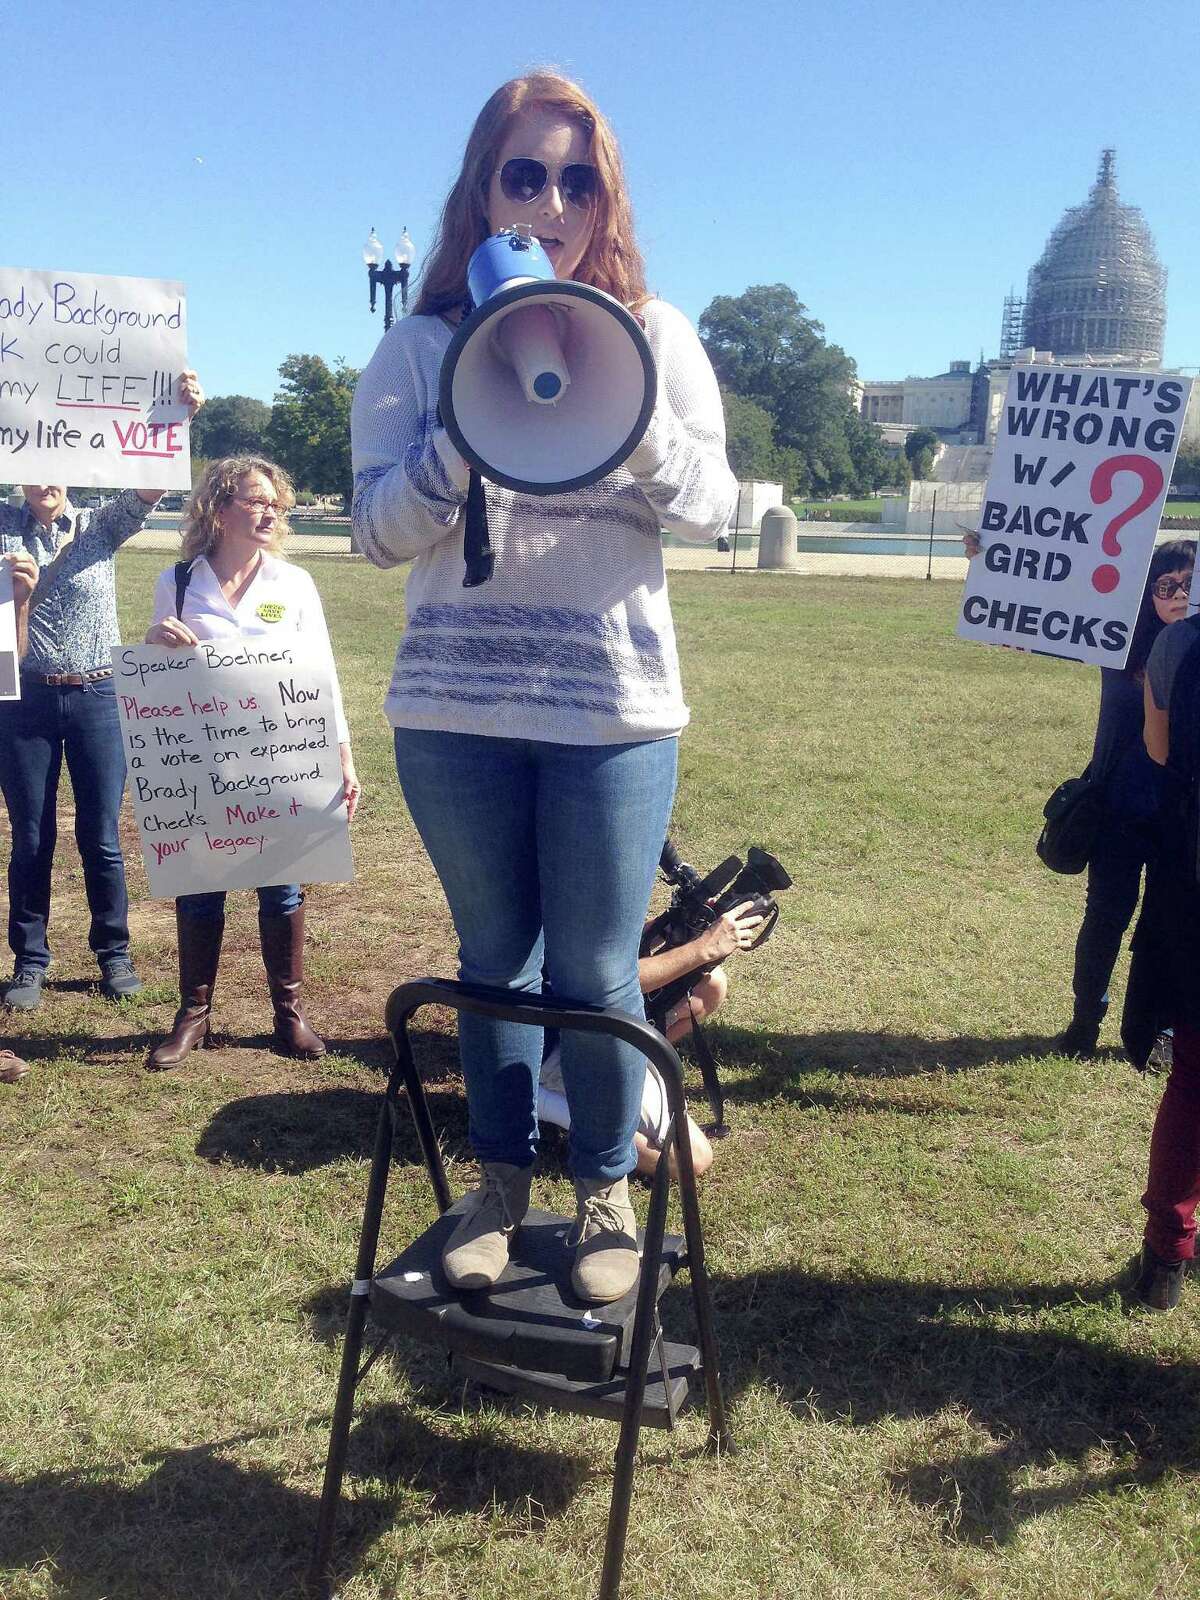 Sarah Clements, from Newtown, speaking at an anti-gun rally in D.C. in 2015. Her mom was a teacher who survived the Sandy Hook massacre.